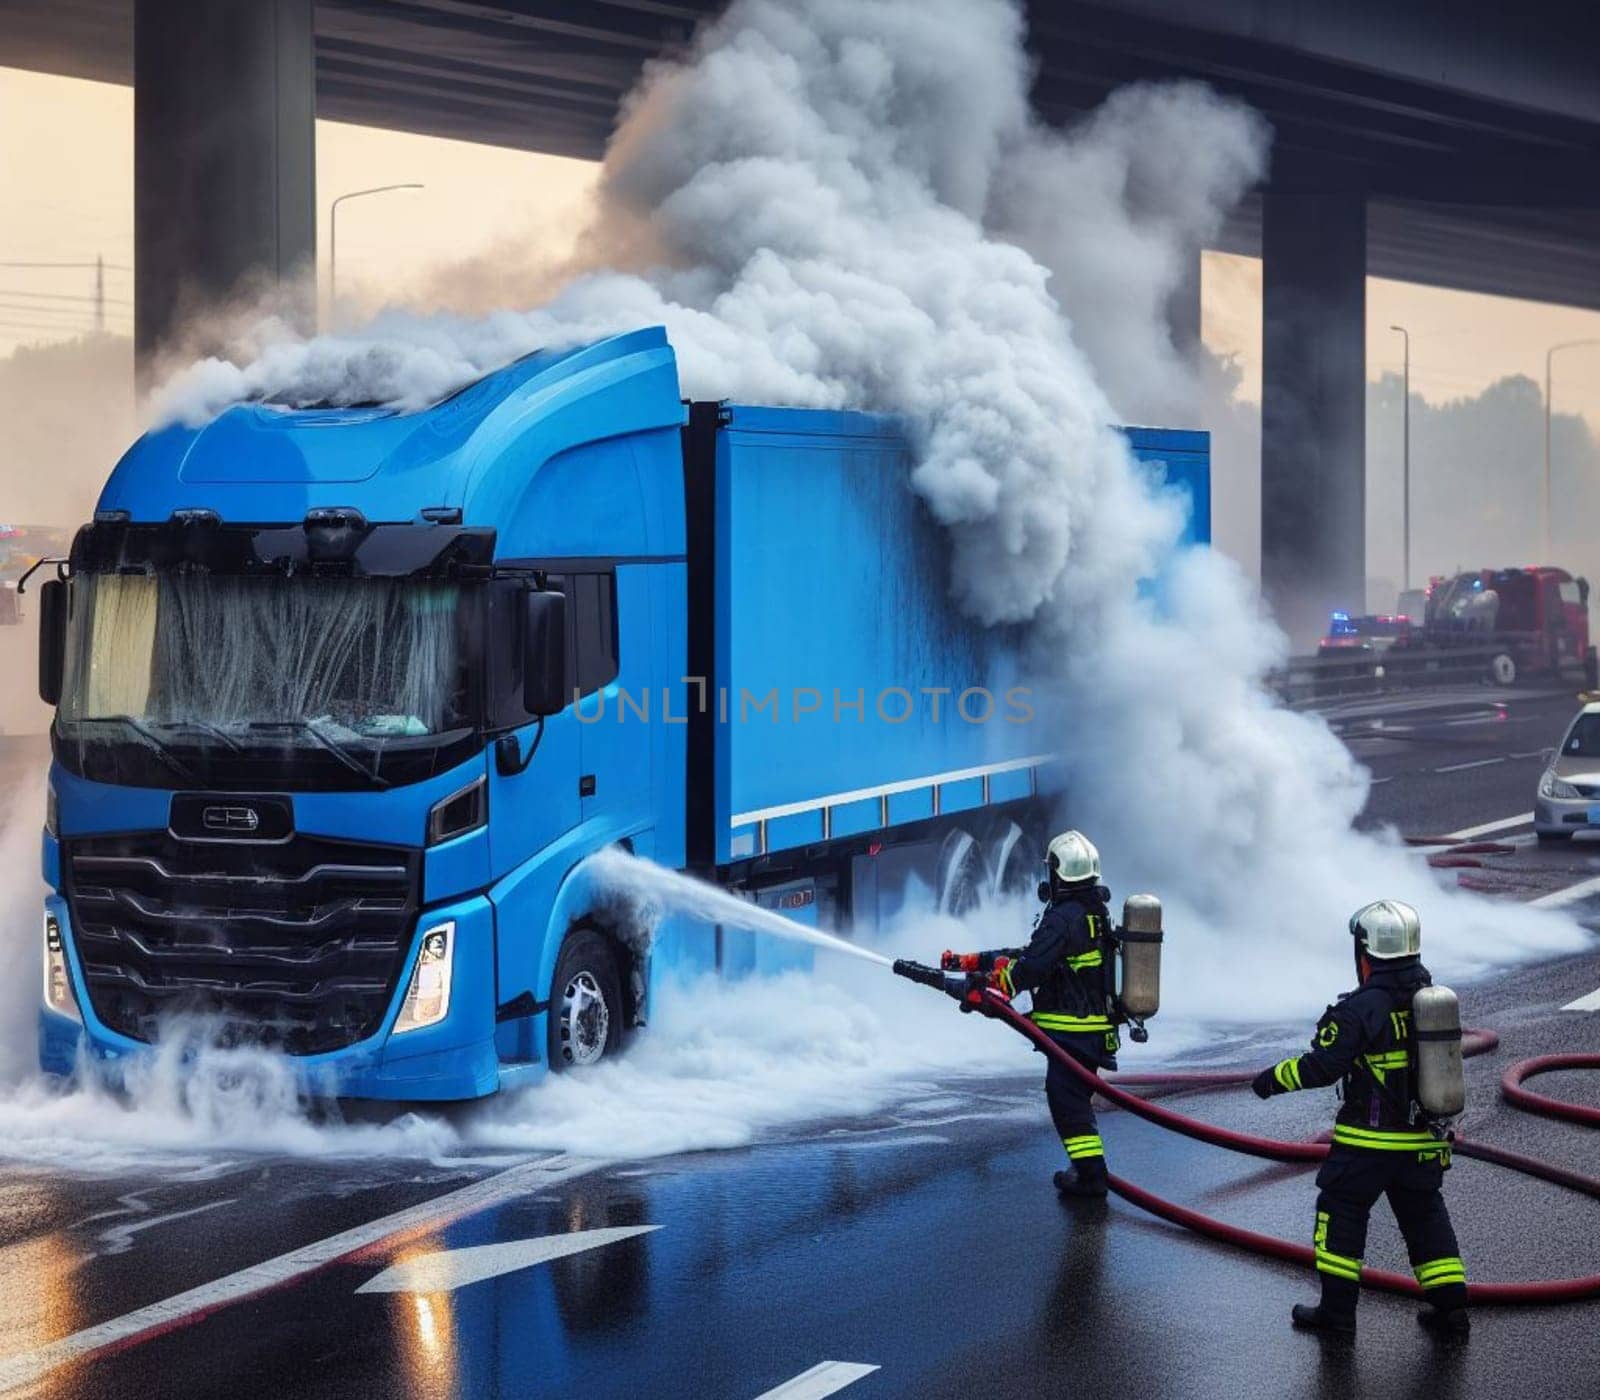 electric hybrid cargo courier semi truck burning, firefighter apply foam extinguish flames big smoke by verbano